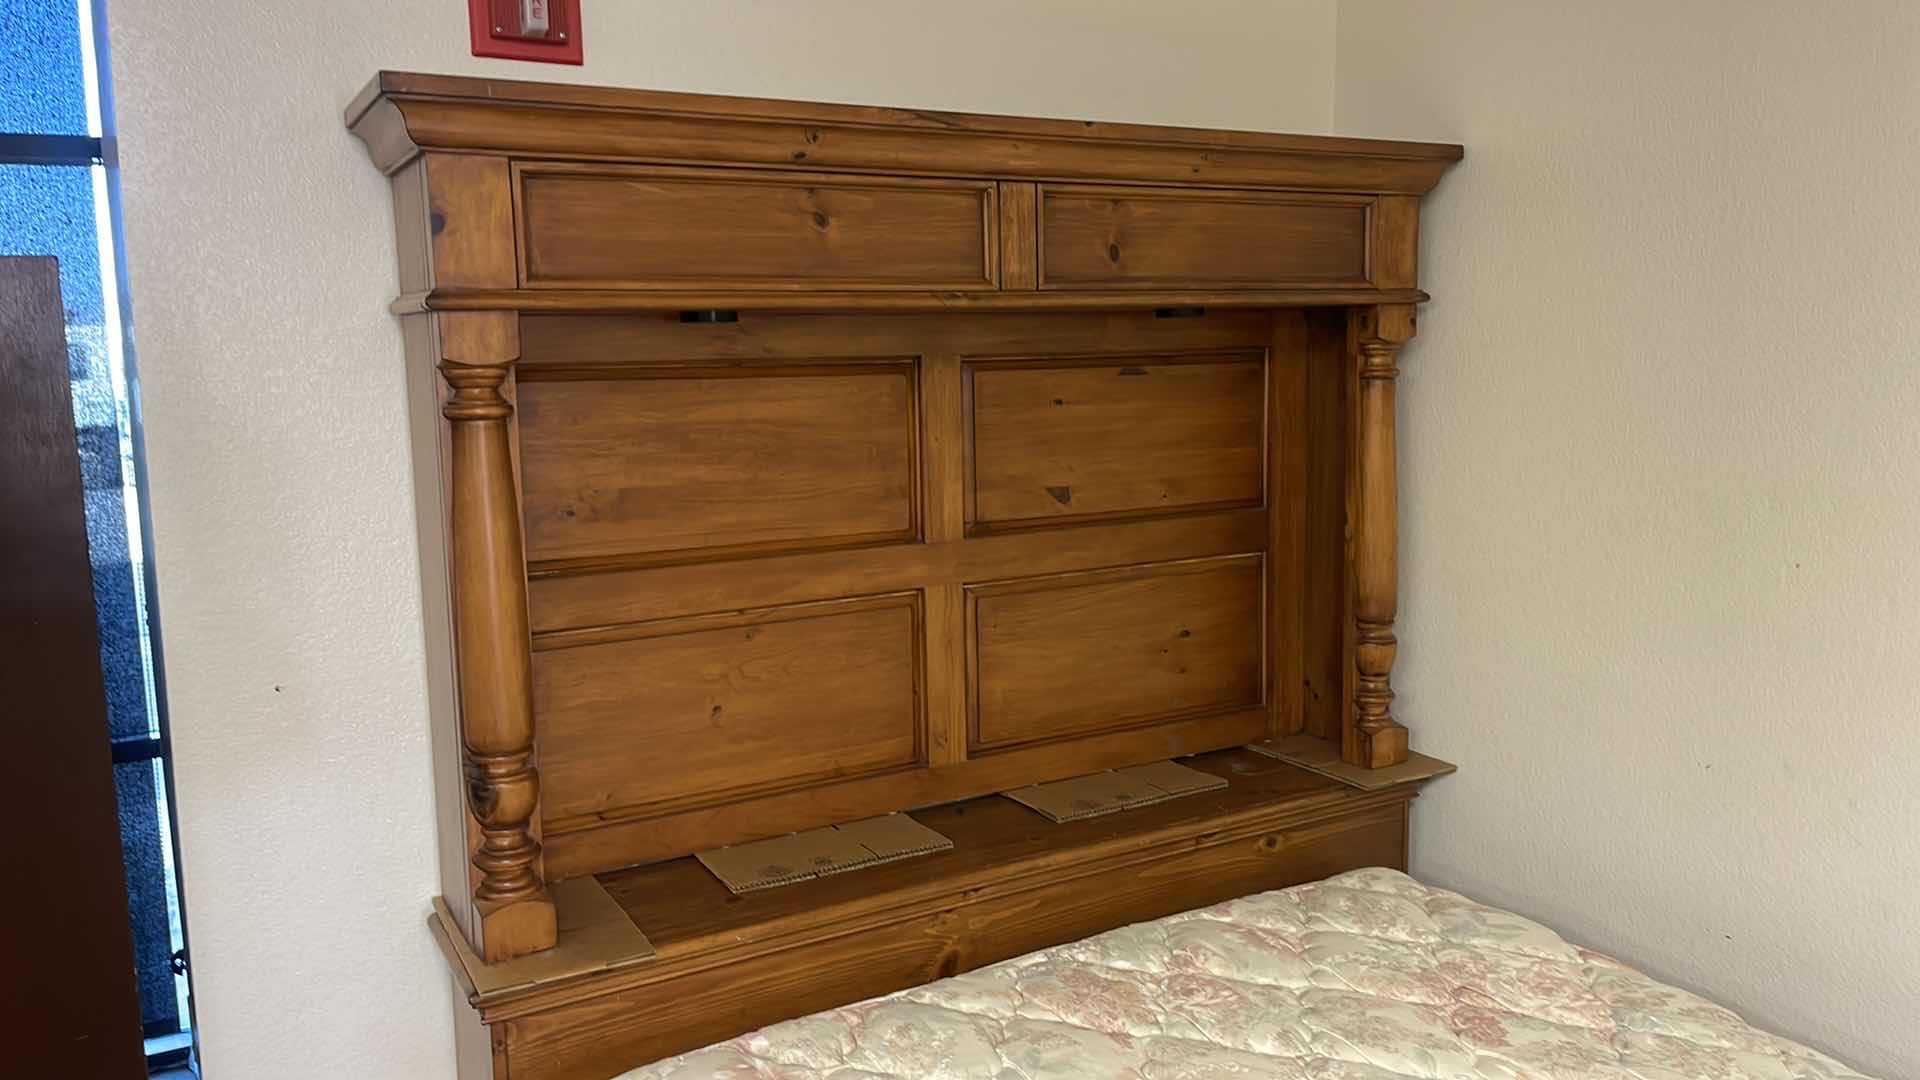 Photo 3 of KNOTTY WOOD FULL SIZE BED FRAME W LIGHTED HEADBOARD (MATTRESS SOLD SEPARATELY) 64” X 98” H79”